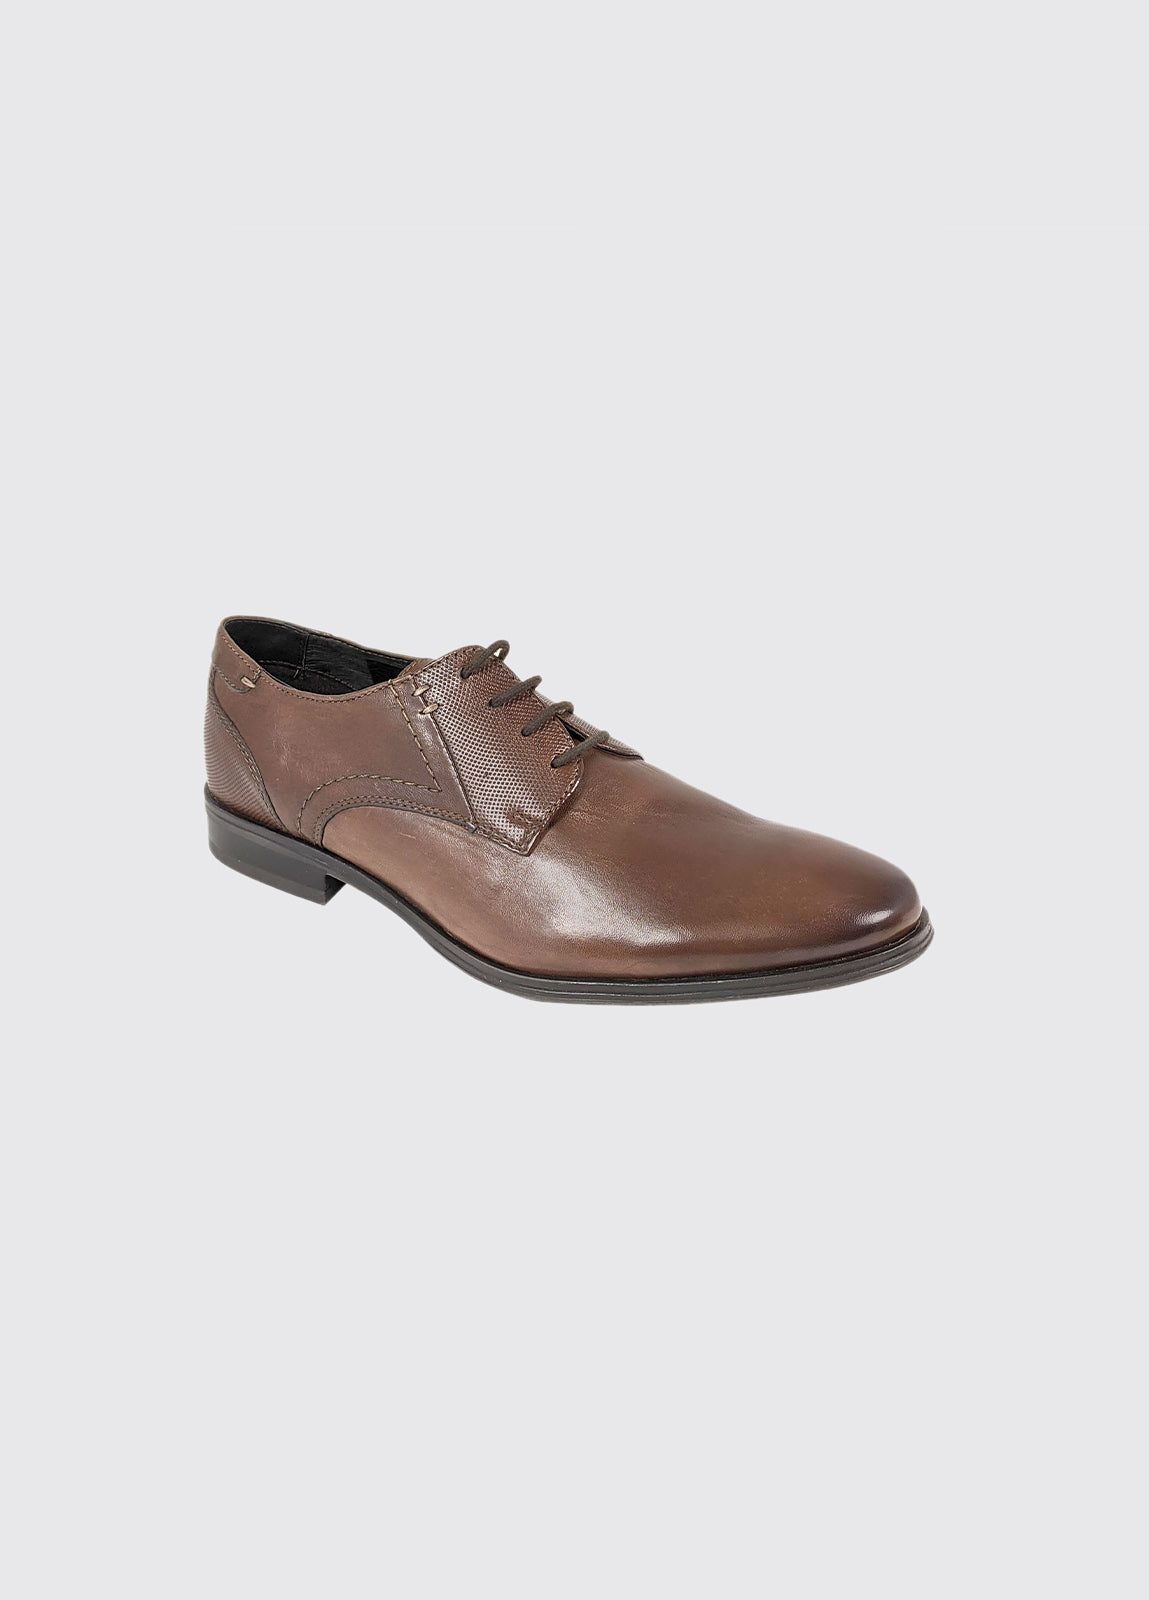 Drago Brown Lace up leather Shoe-Side view